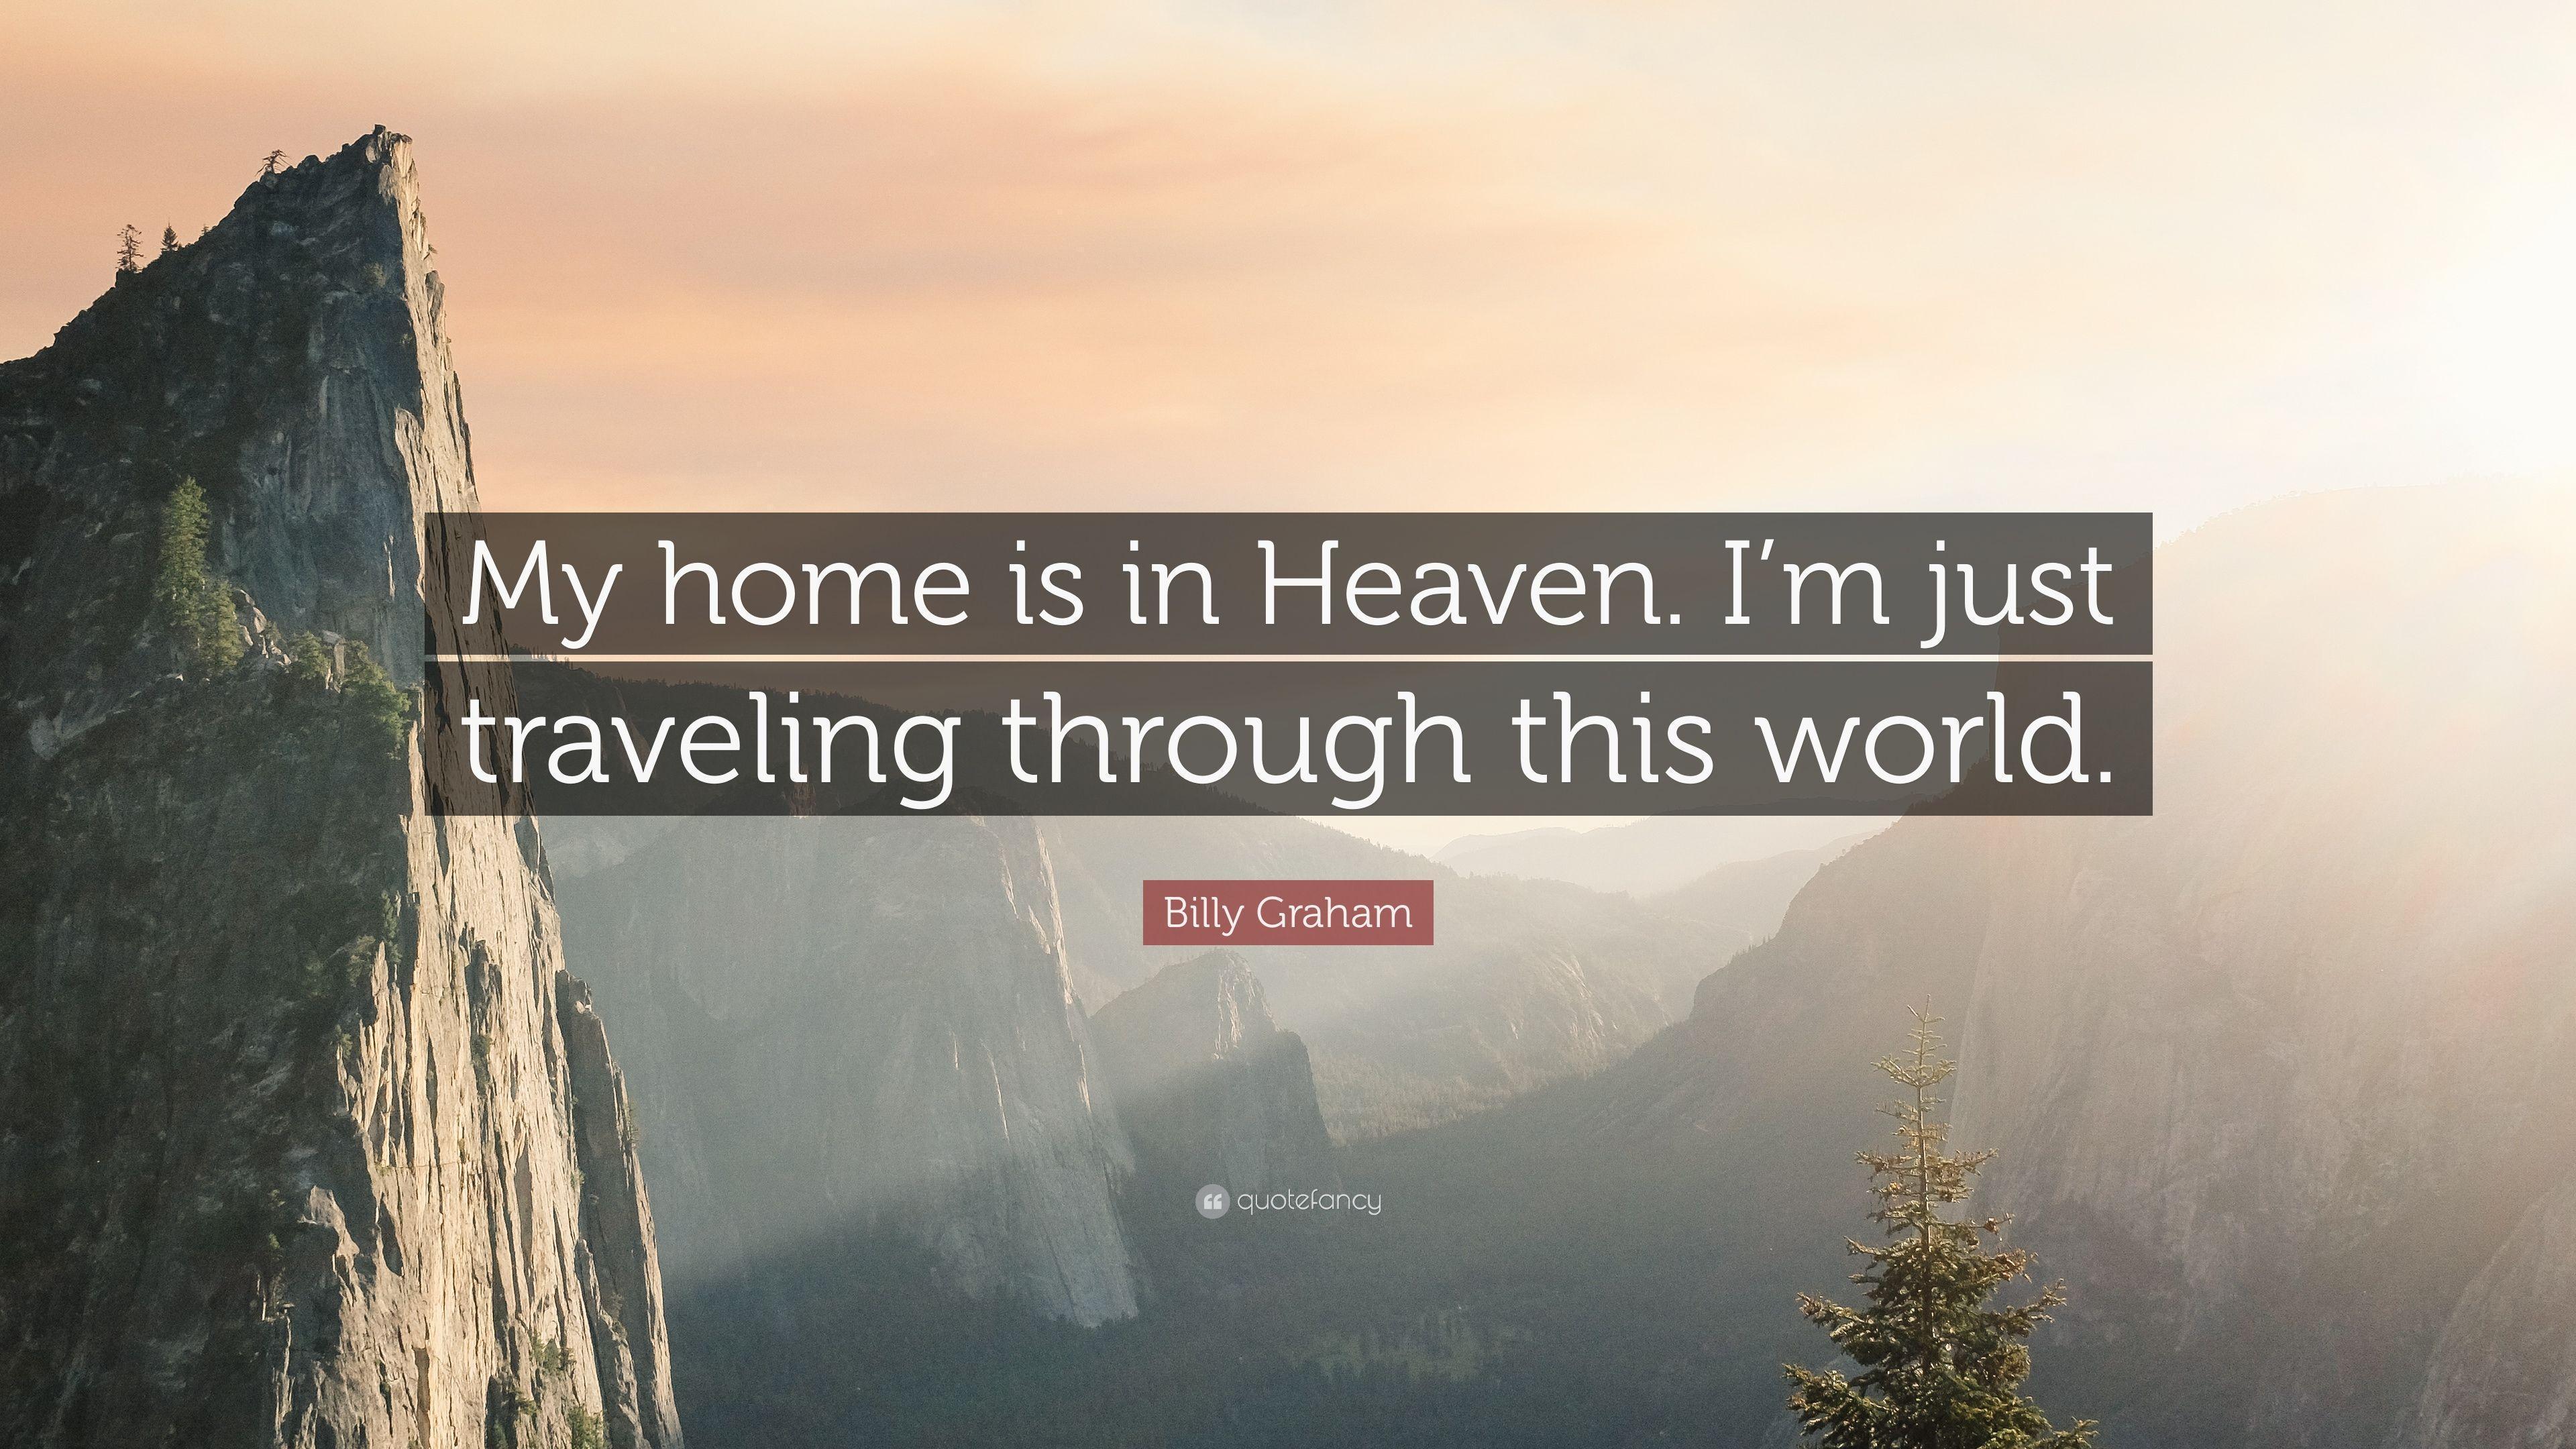 Billy Graham Quote: “My home is in Heaven. I'm just traveling